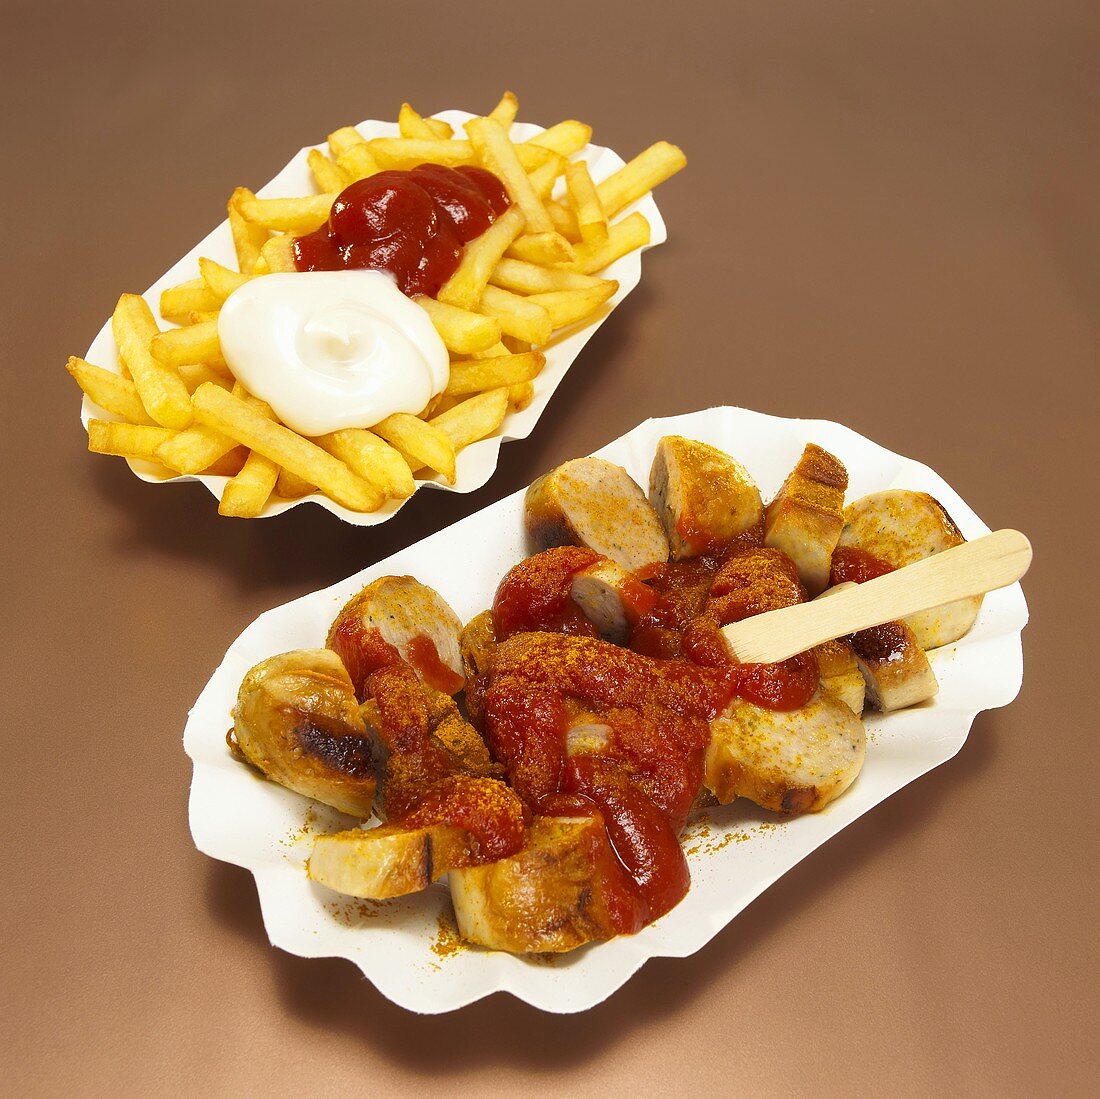 Currywurst and French fries with sauce in plate, close-up